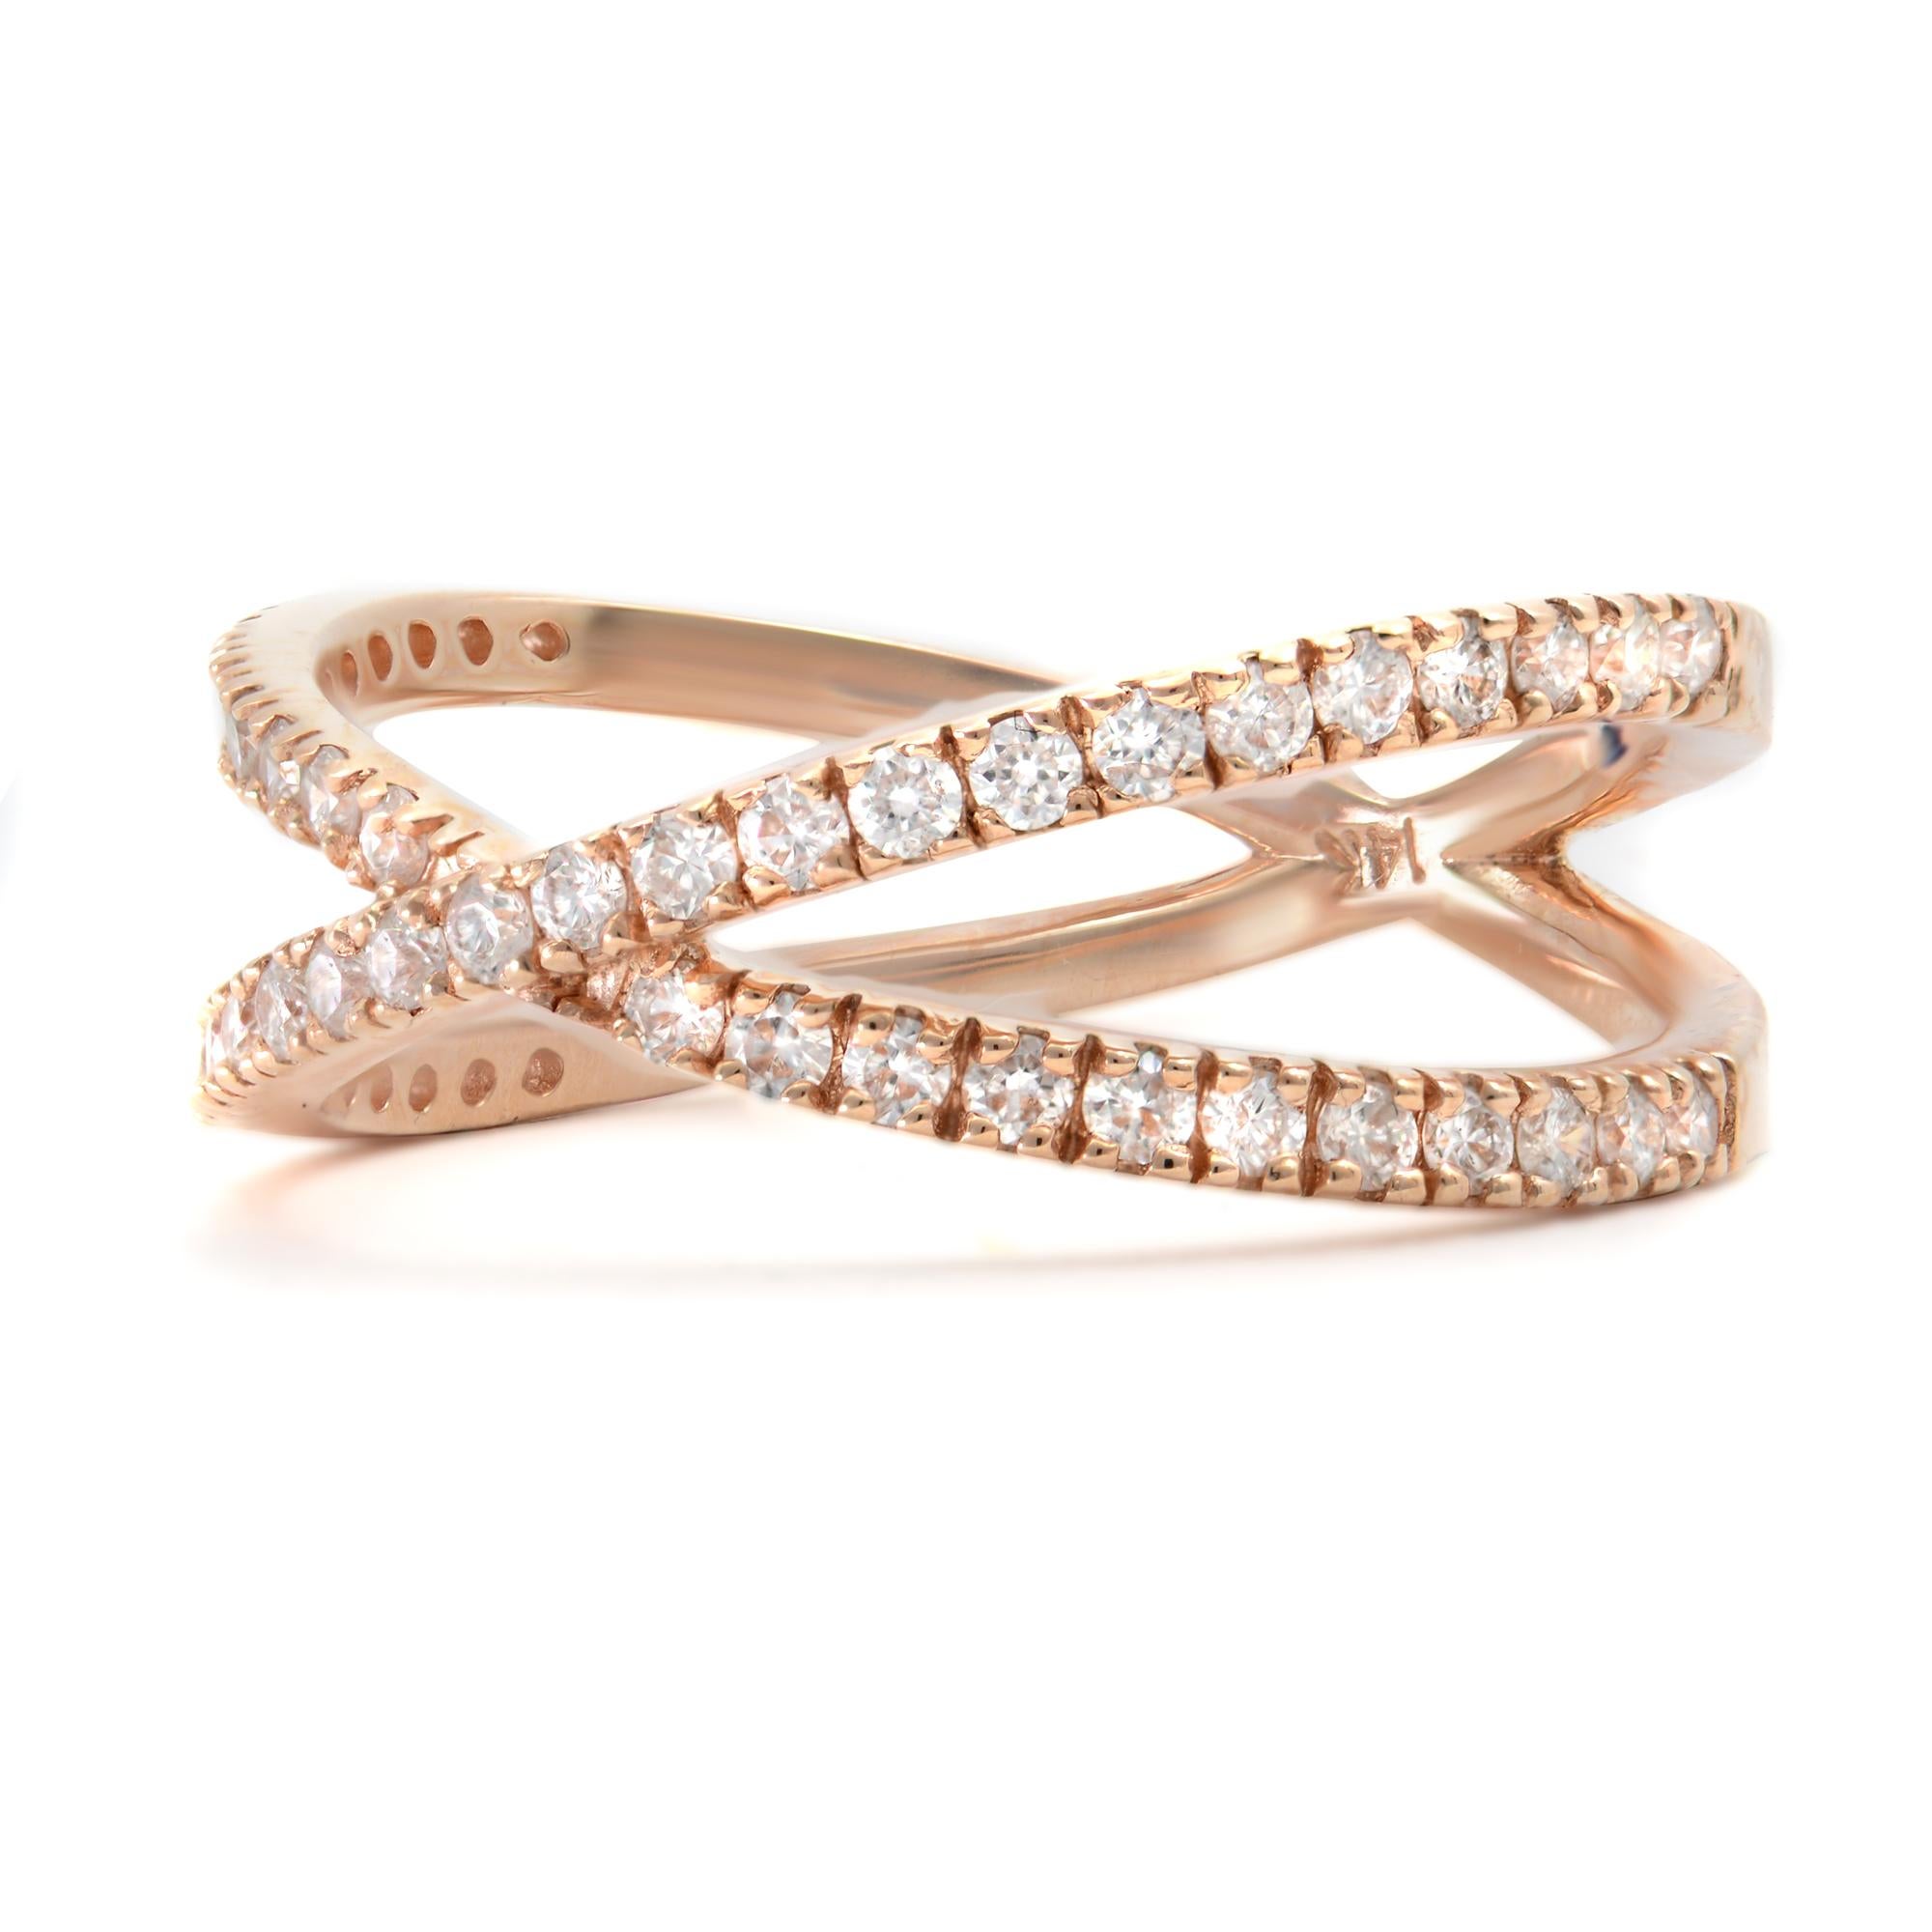 Two bands of brilliant pave set round diamonds intersect each other in a criss-cross design. Crafted in 14k rose gold, this ring exudes understated style and elegance. Set with 0.54 carat in total. Diamond color G and SI-VS clarity. Ring size 7.25.